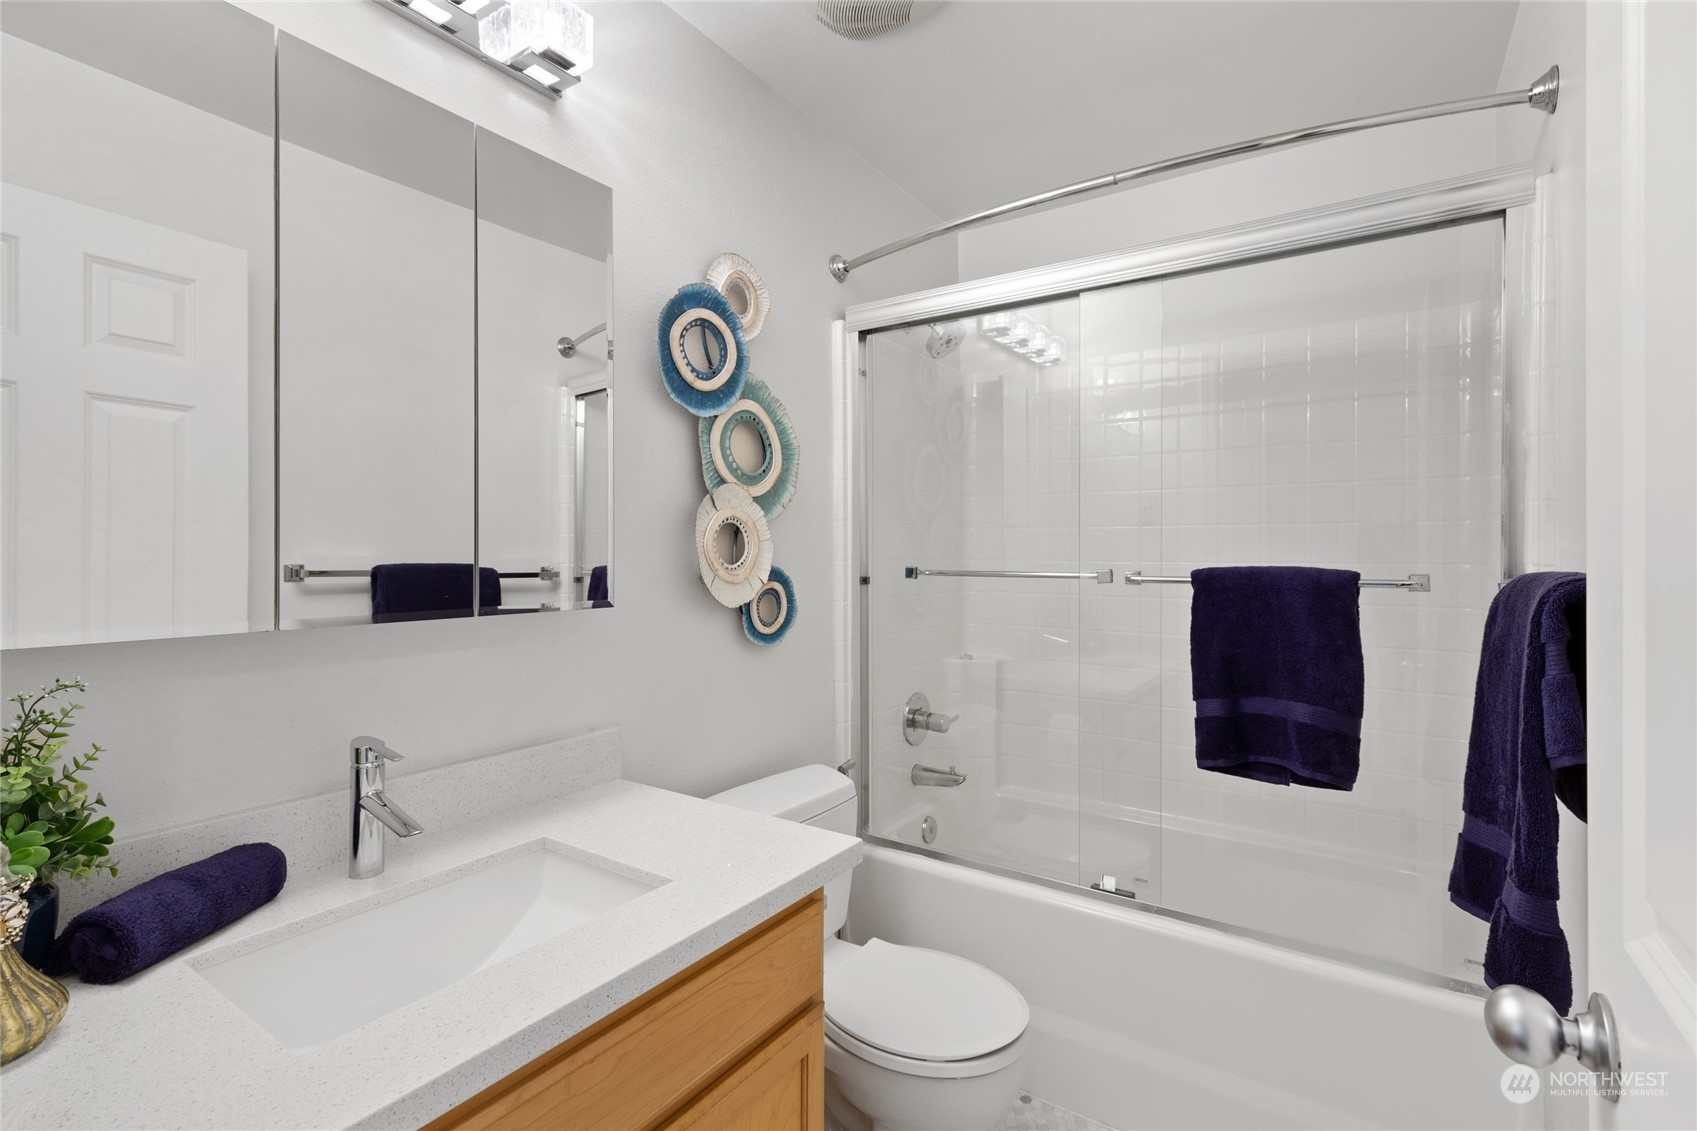 1766 N Northgate Way Unit G, Seattle, Washington, 98133, United States, 2 Bedrooms Bedrooms, ,2 BathroomsBathrooms,Residential,For Sale,1766 N Northgate Way Unit G,1486871